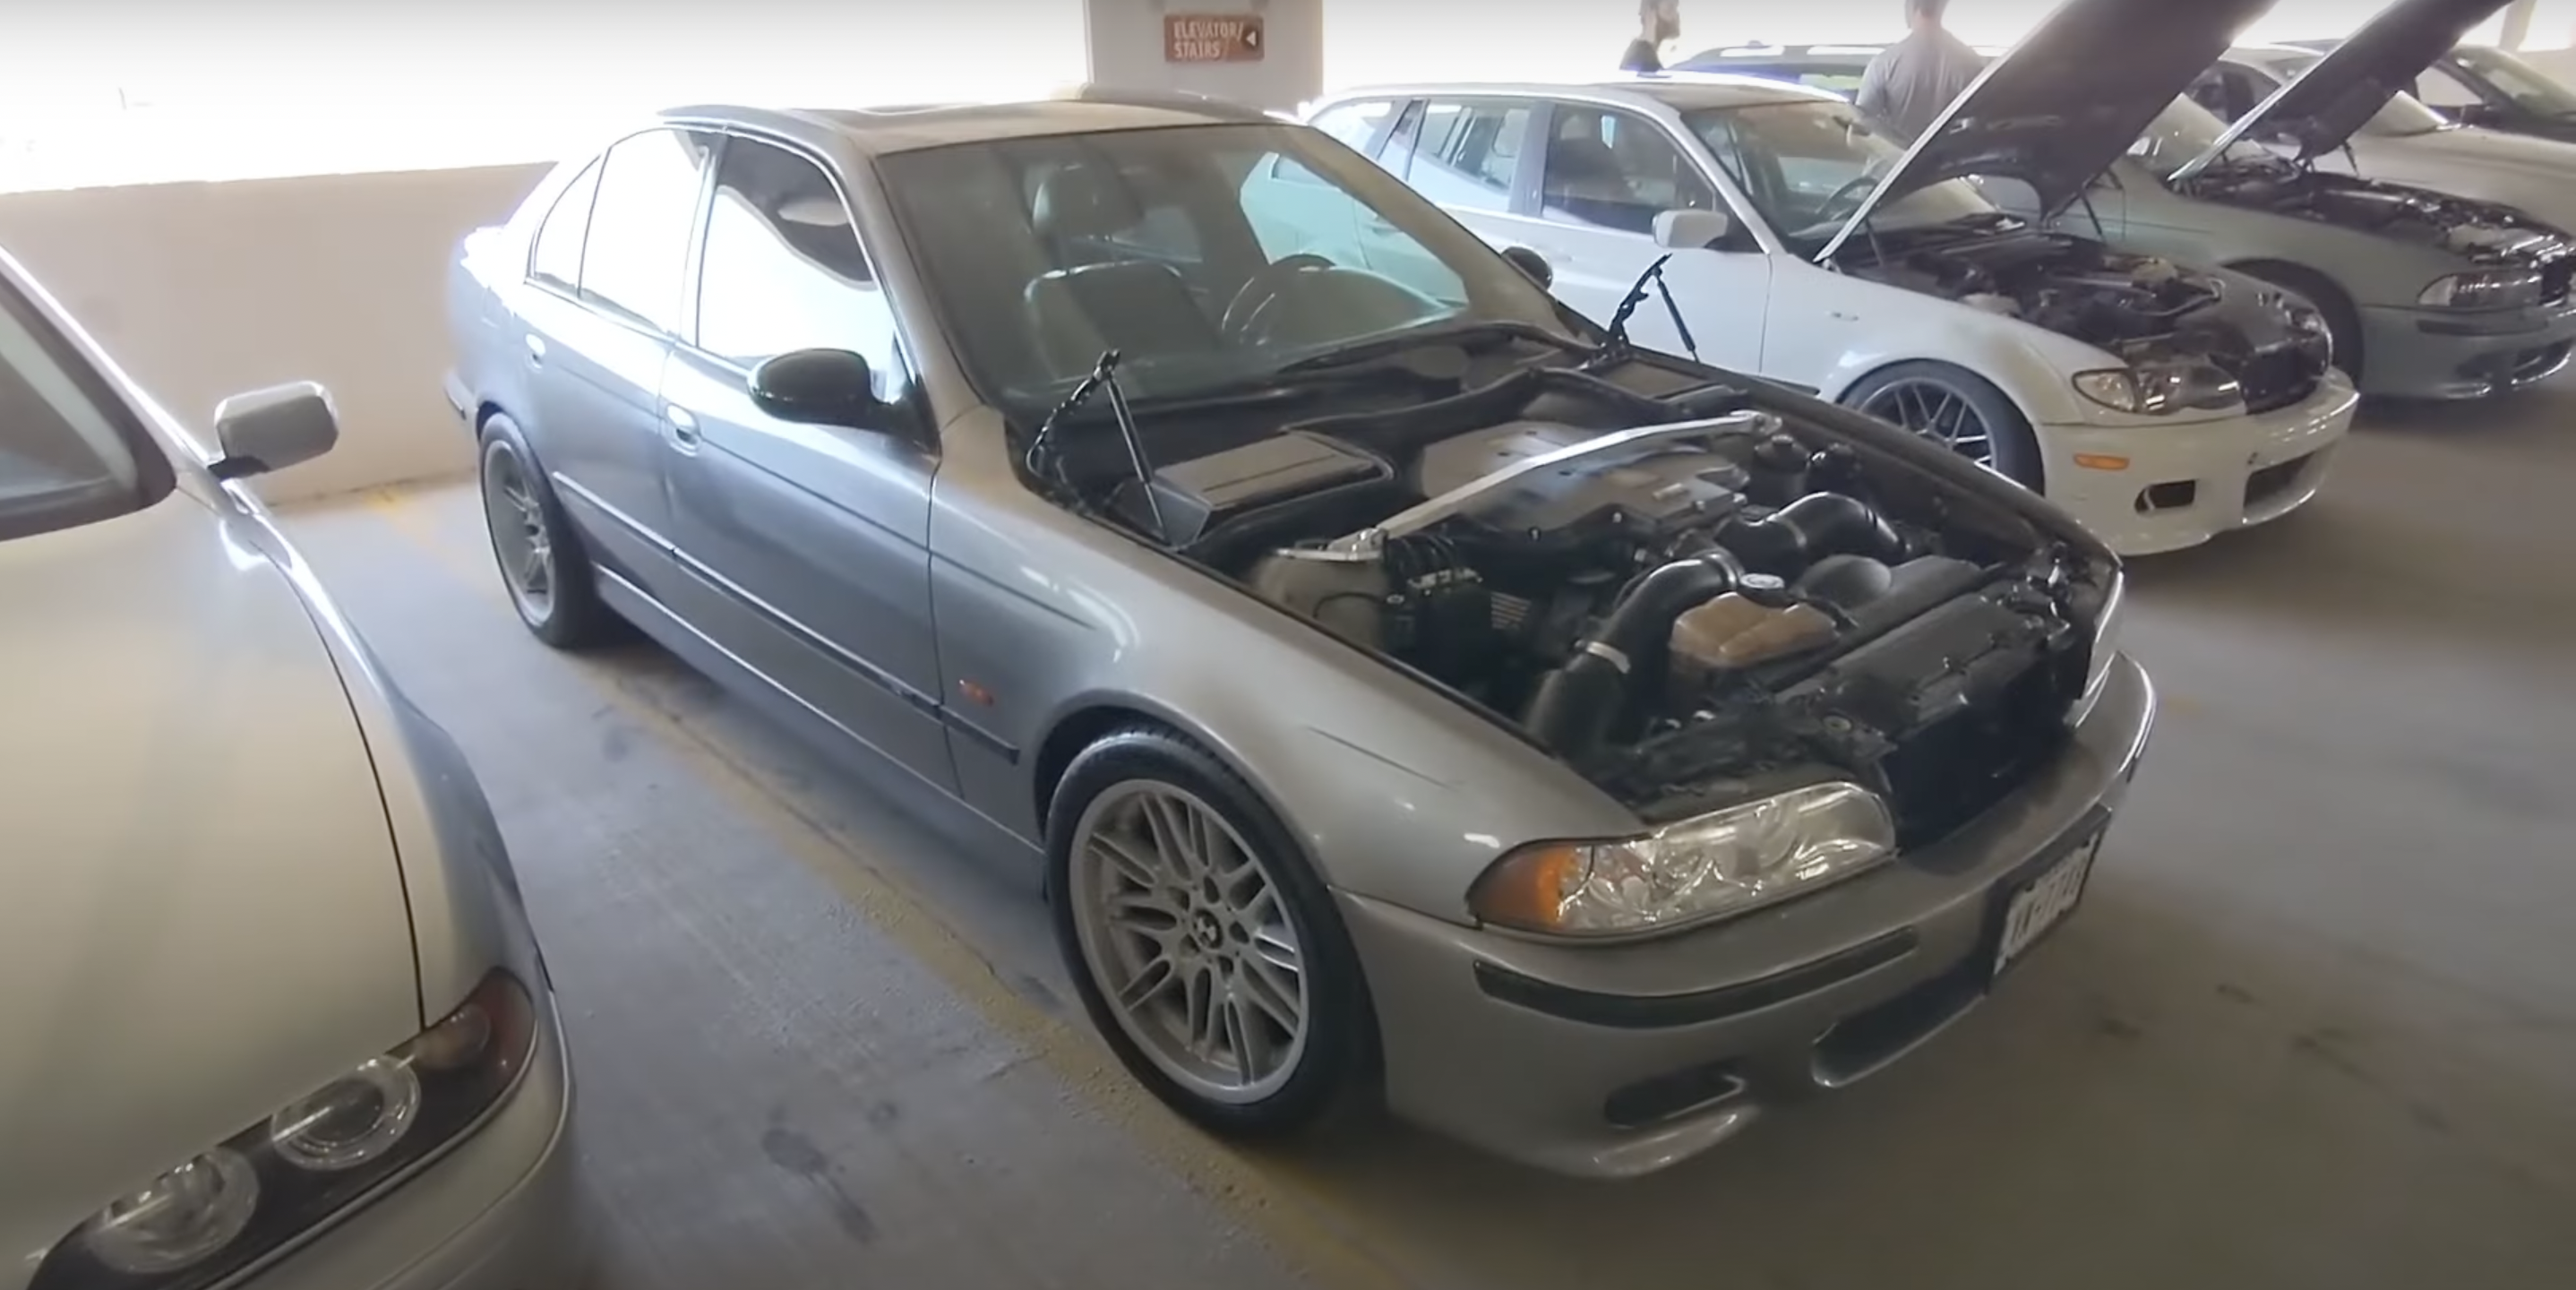 This Might Be the Highest-Mileage BMW M5 on the Planet